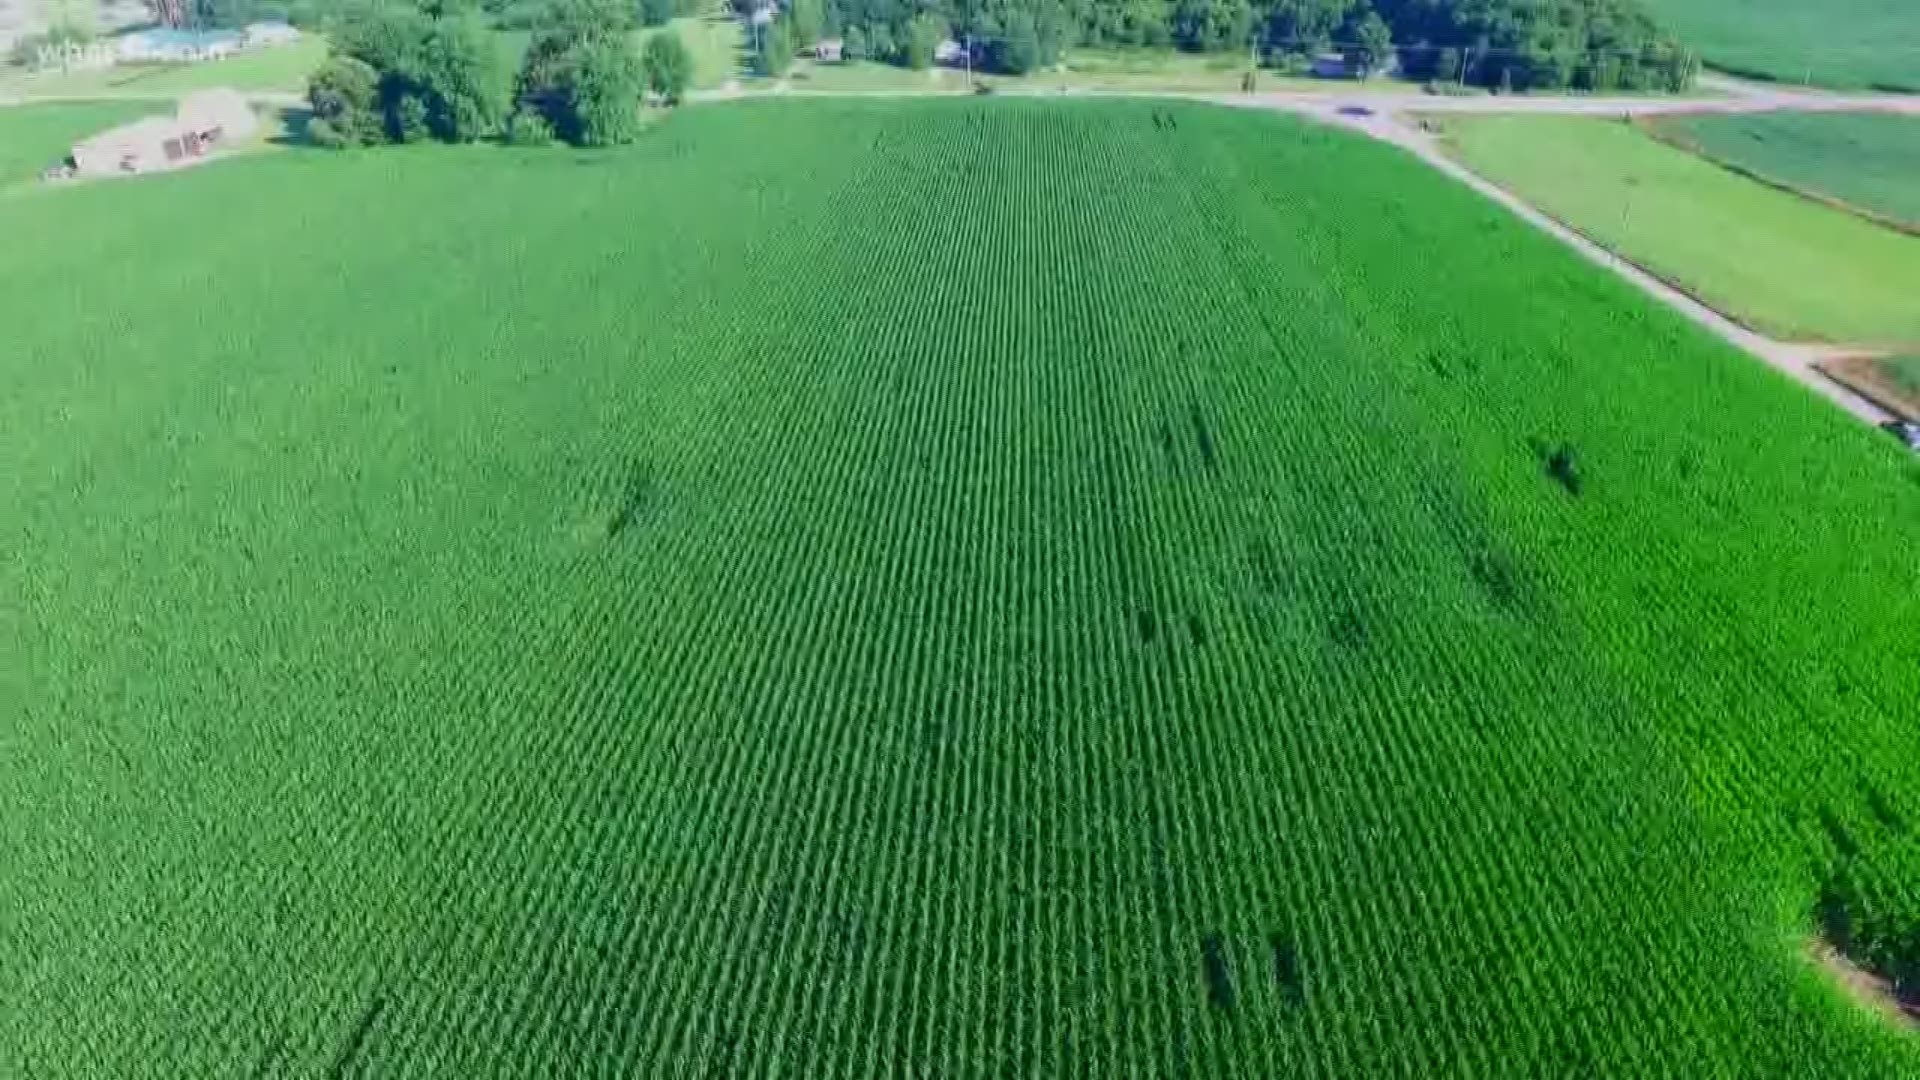 The latest innovation in farming isn't a tractor or a seed - it's a drone. Farmers in southern Indiana are using drones to better manage their crops.